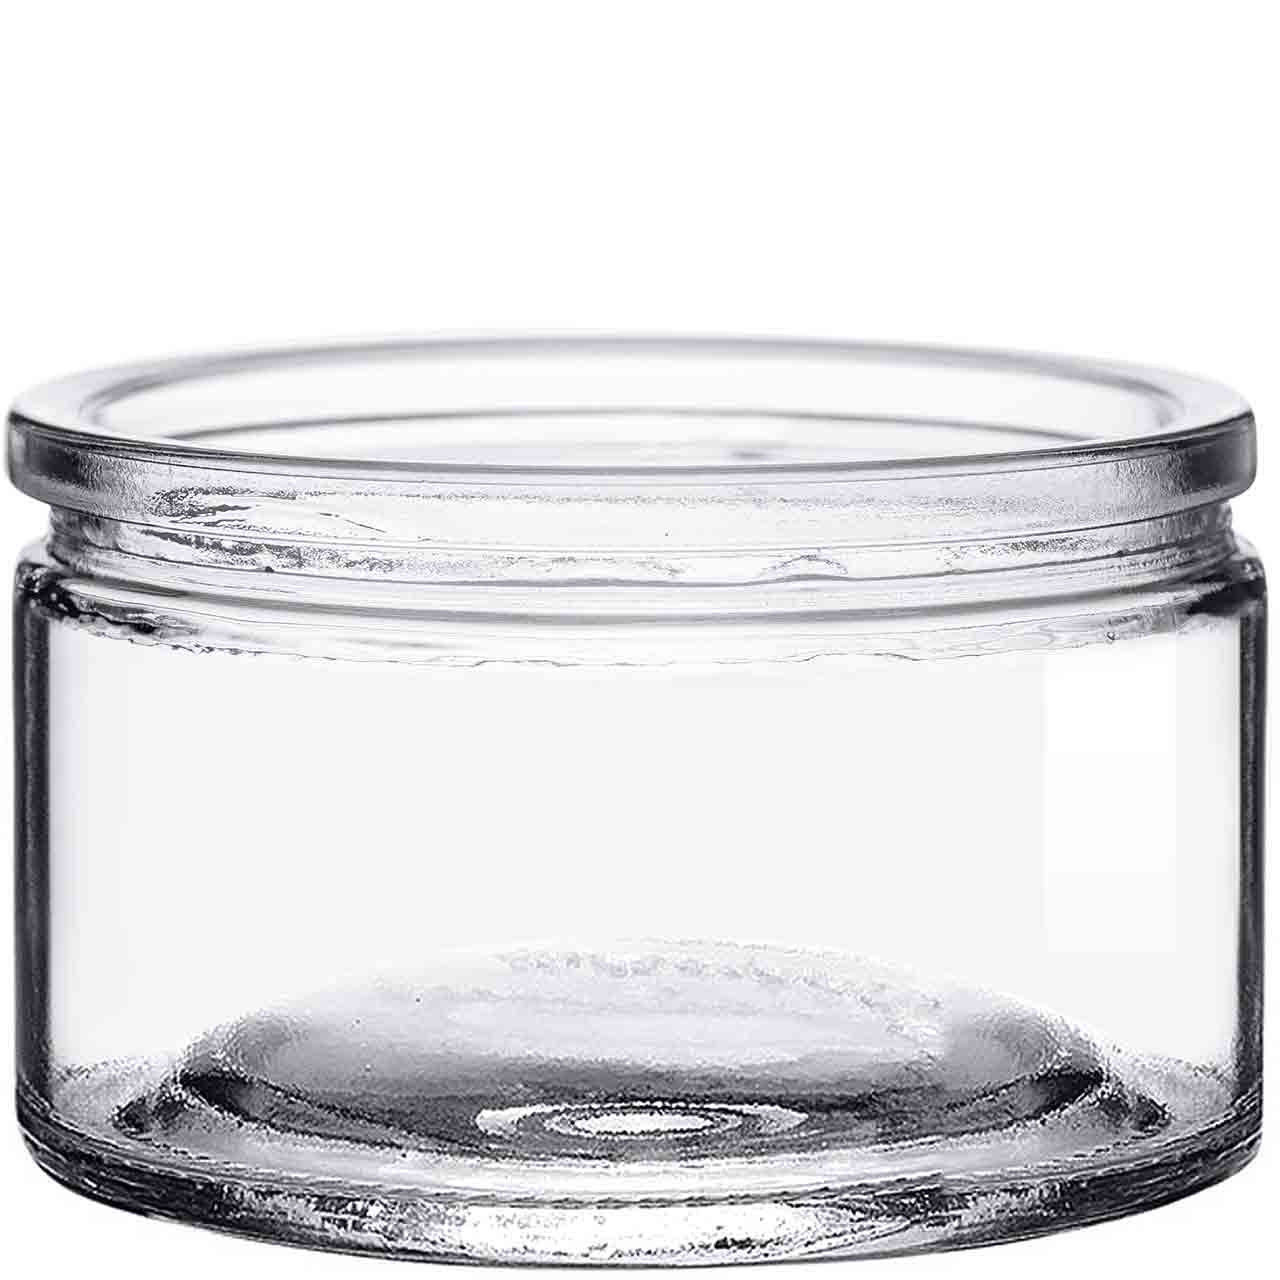 4 oz Glass Straight Sided Spice Jars with Your Choice of Lids